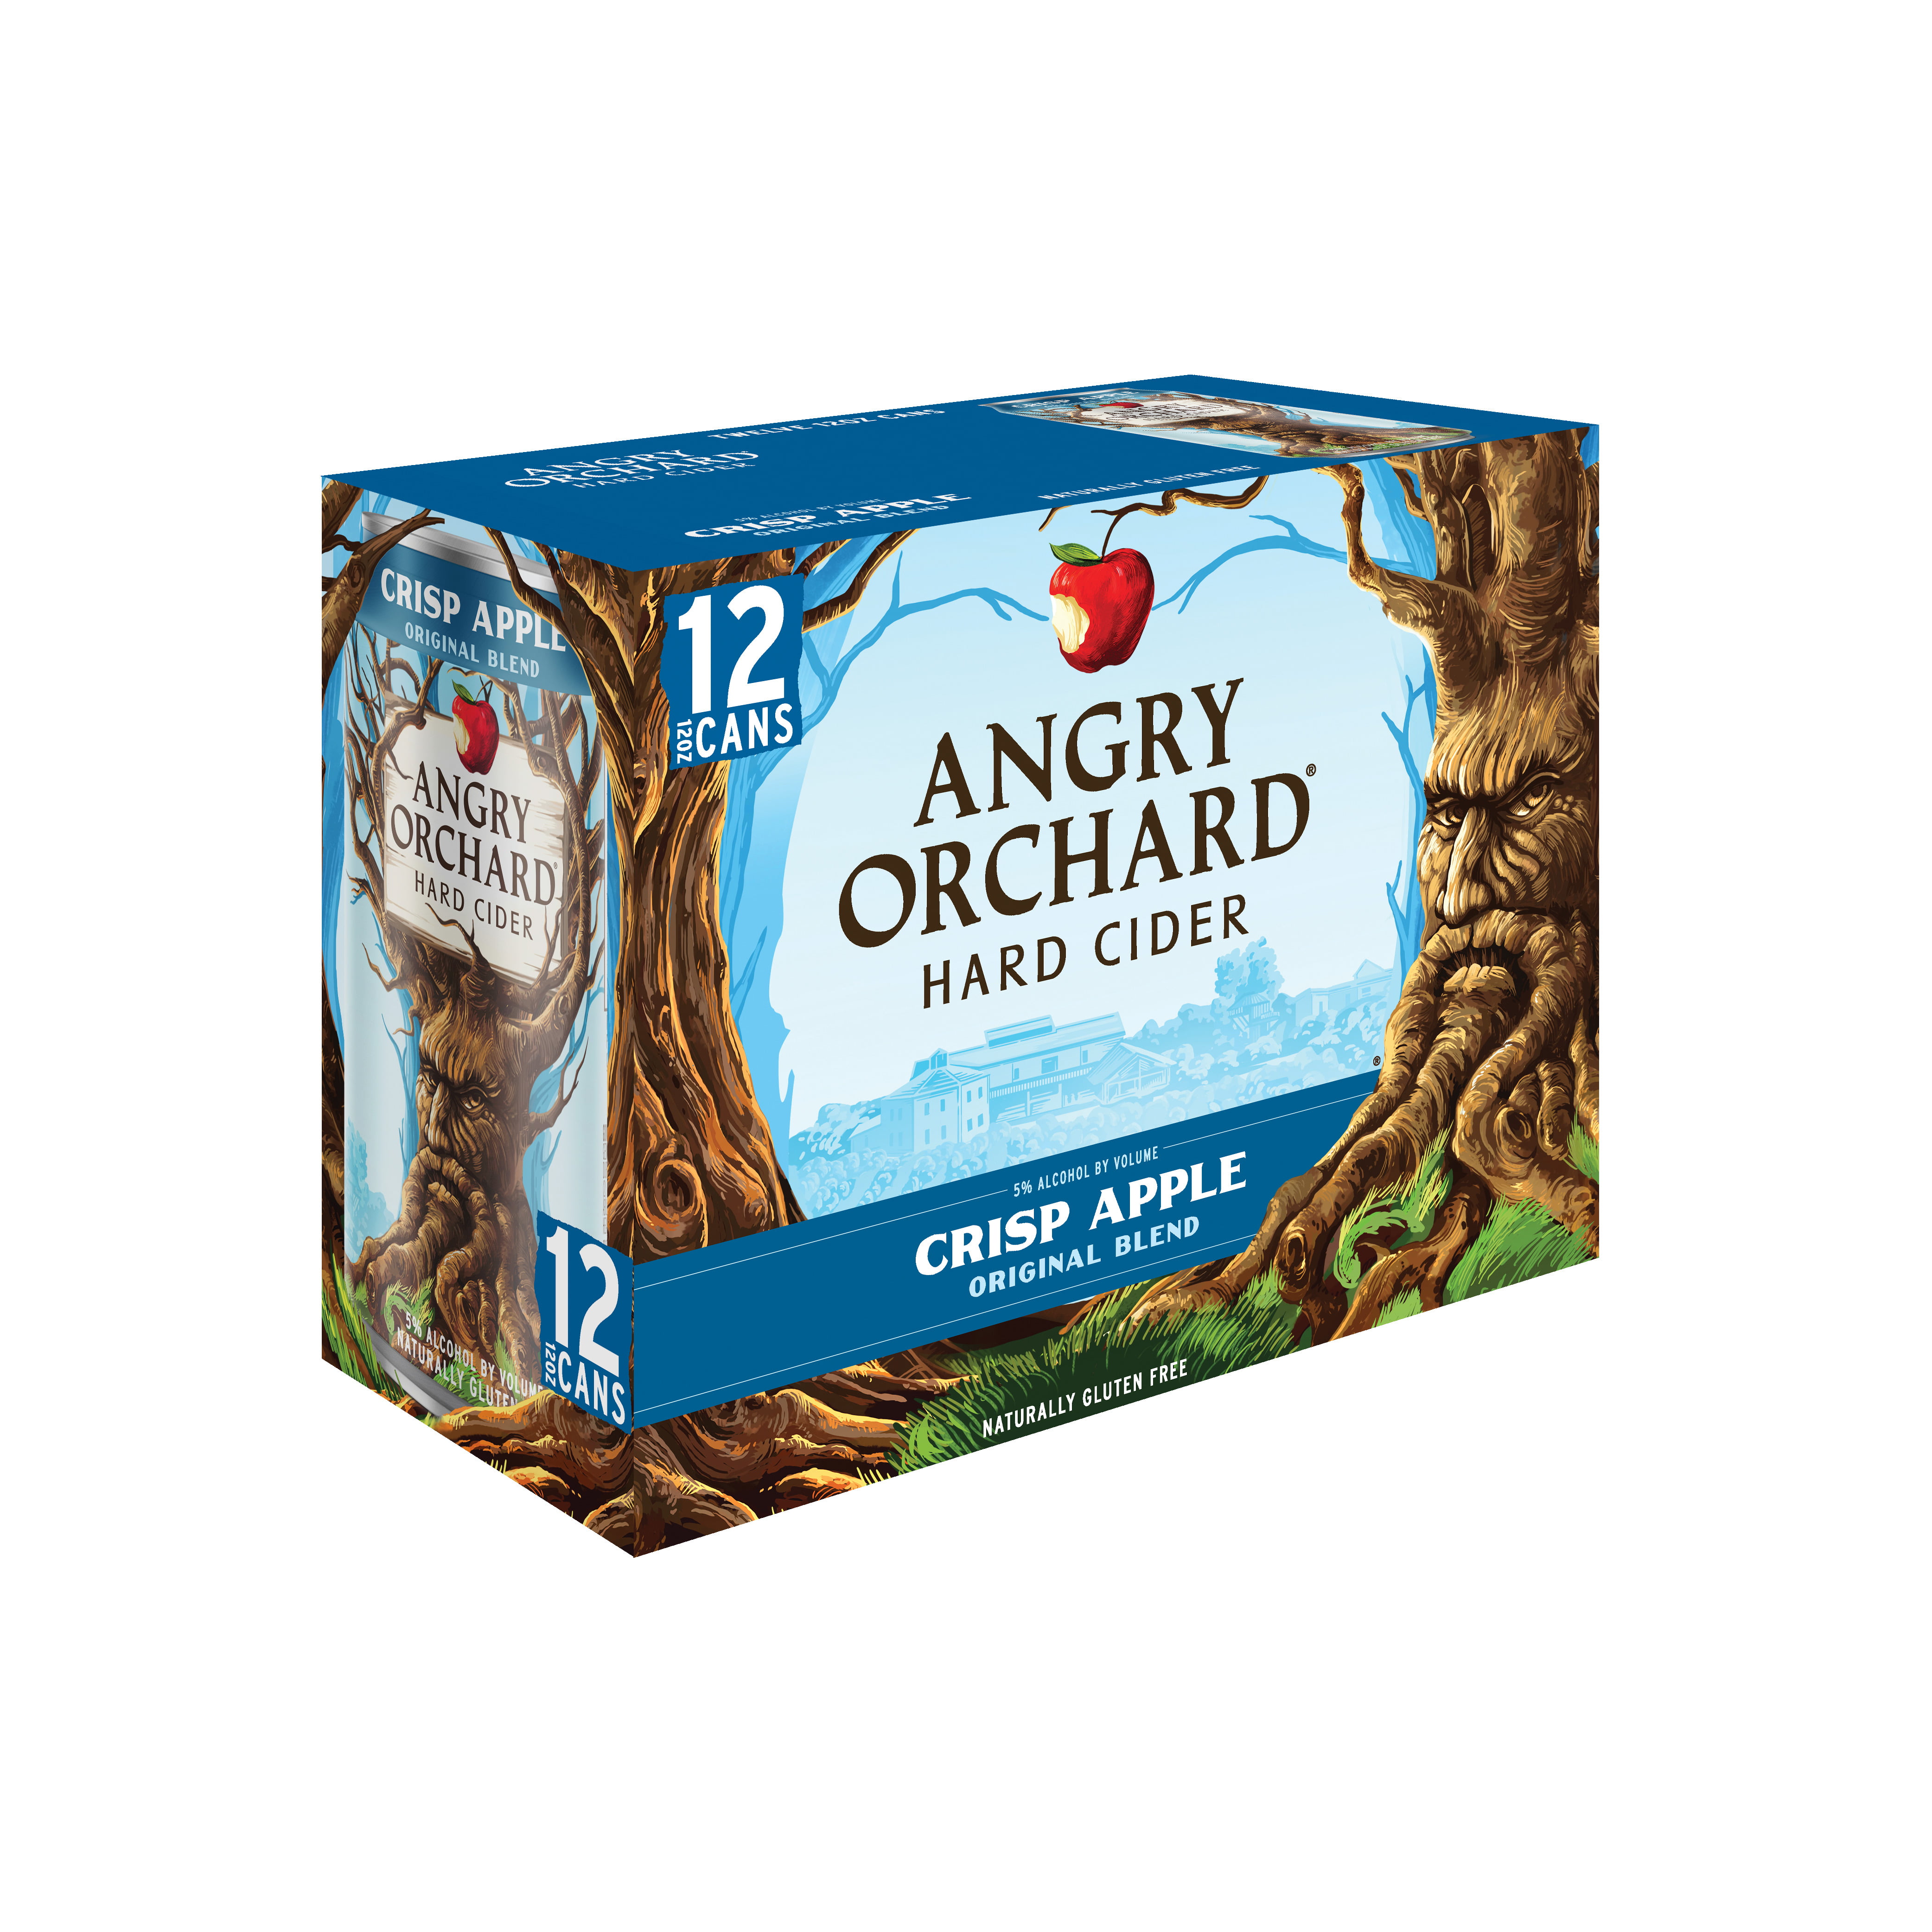 wallpapers Angry Orchard Hard Cider Cans walmart.